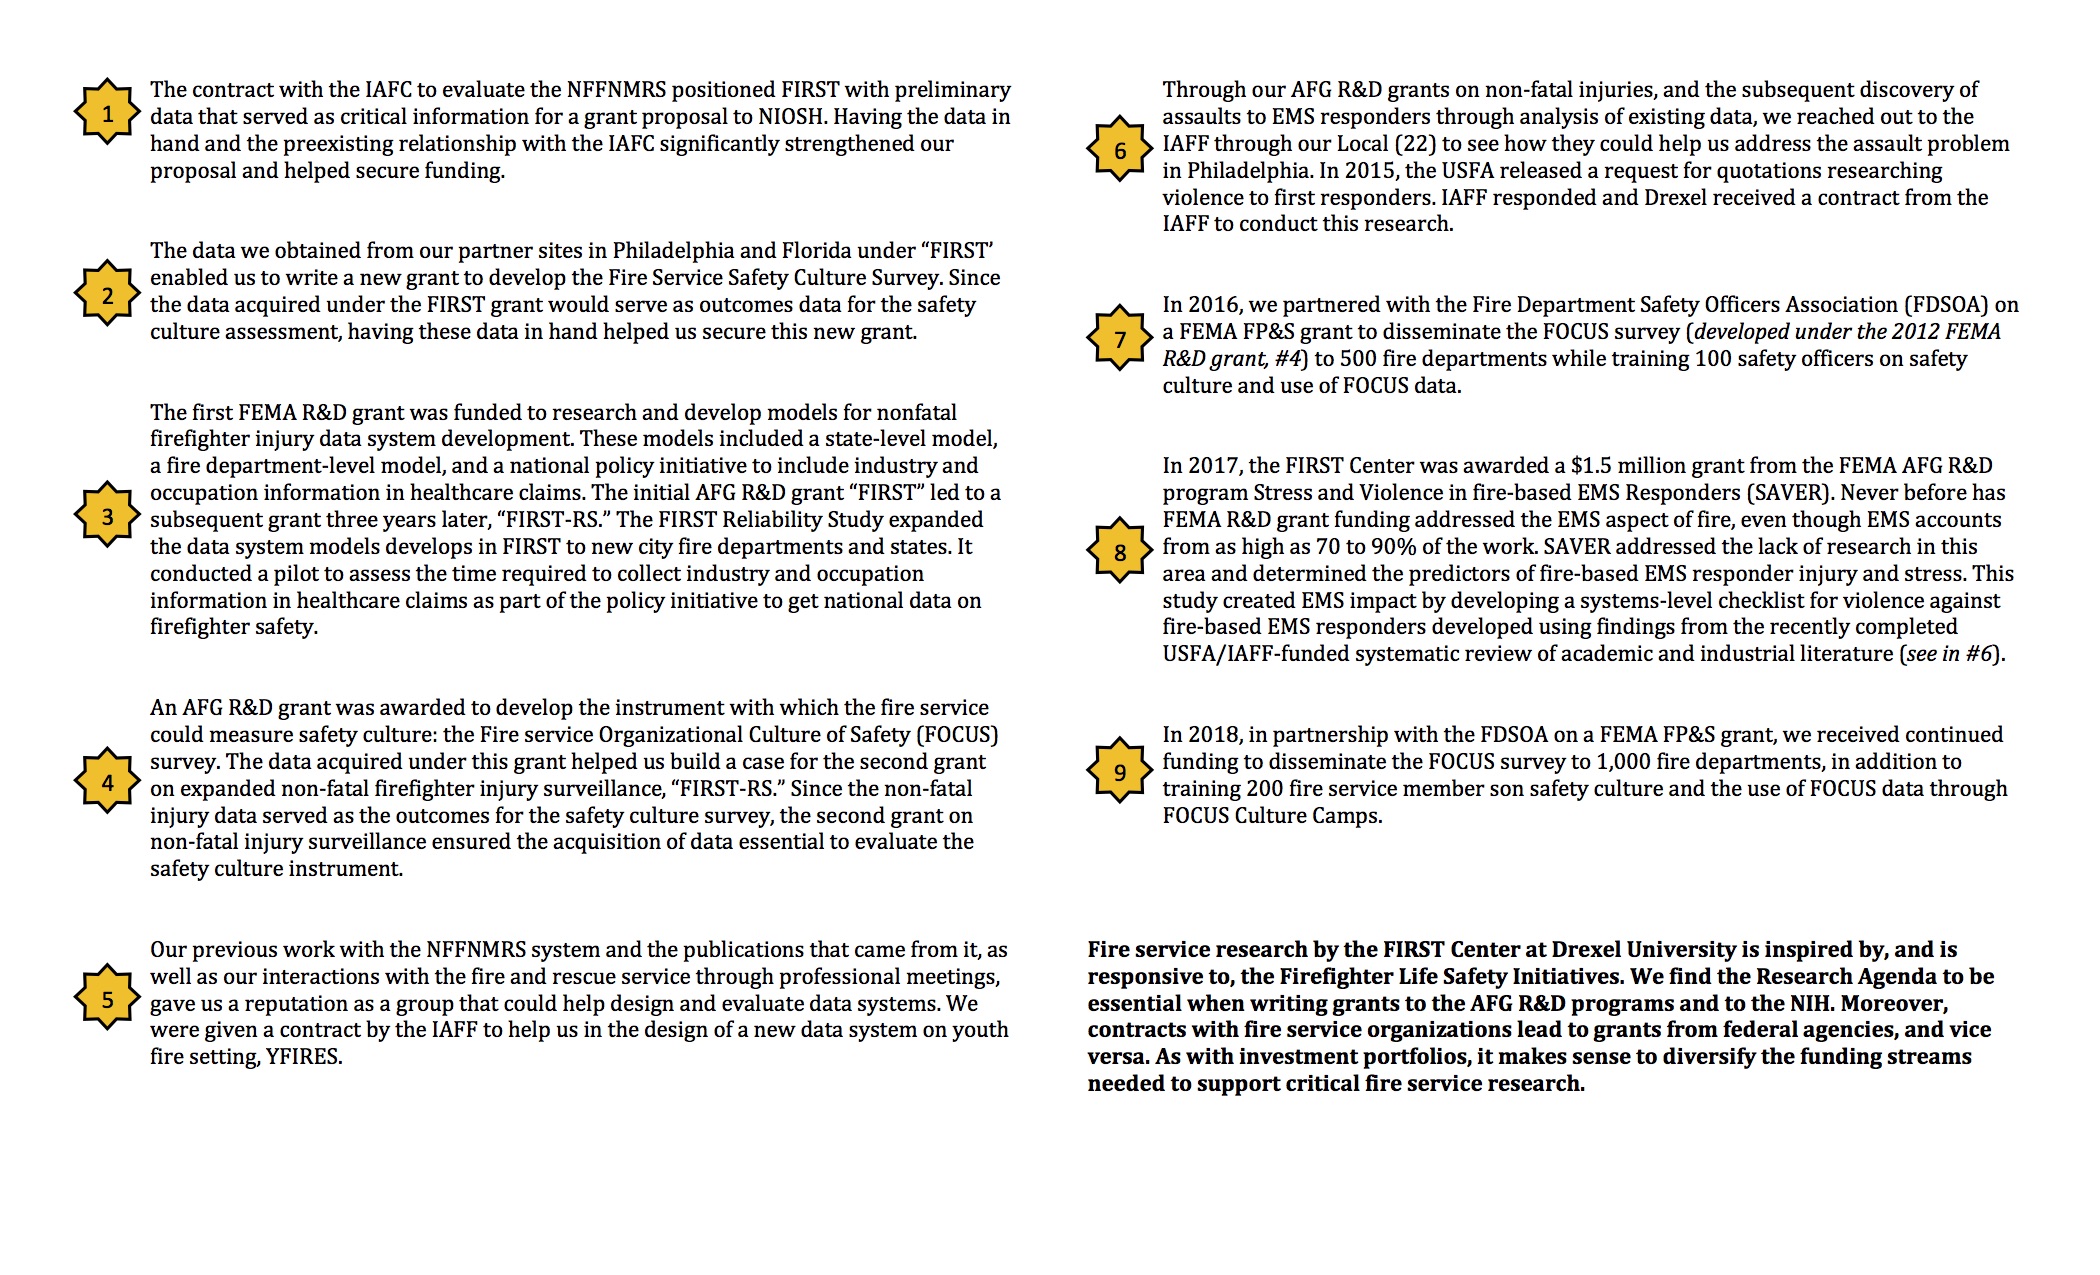 NLSI FIRST Timeline page 2